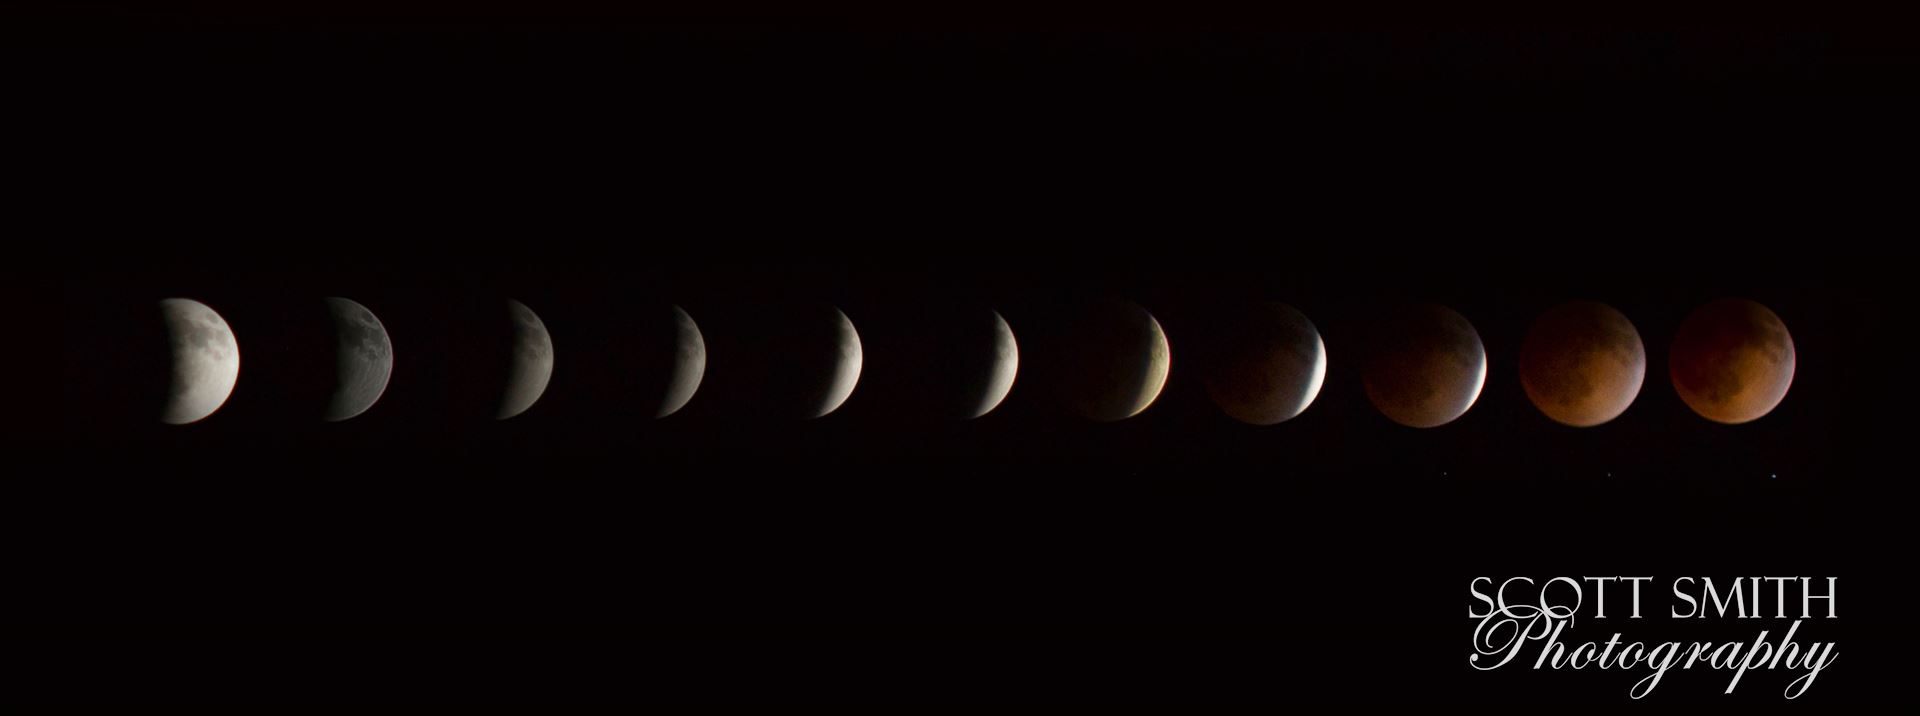 2014 Blood Moon Collage - Lunar eclipse and blood moon, 4/15/2014.  Shot as separate frames with a 100mm Canon f/2.8 and assembled in Photoshop. by Scott Smith Photos